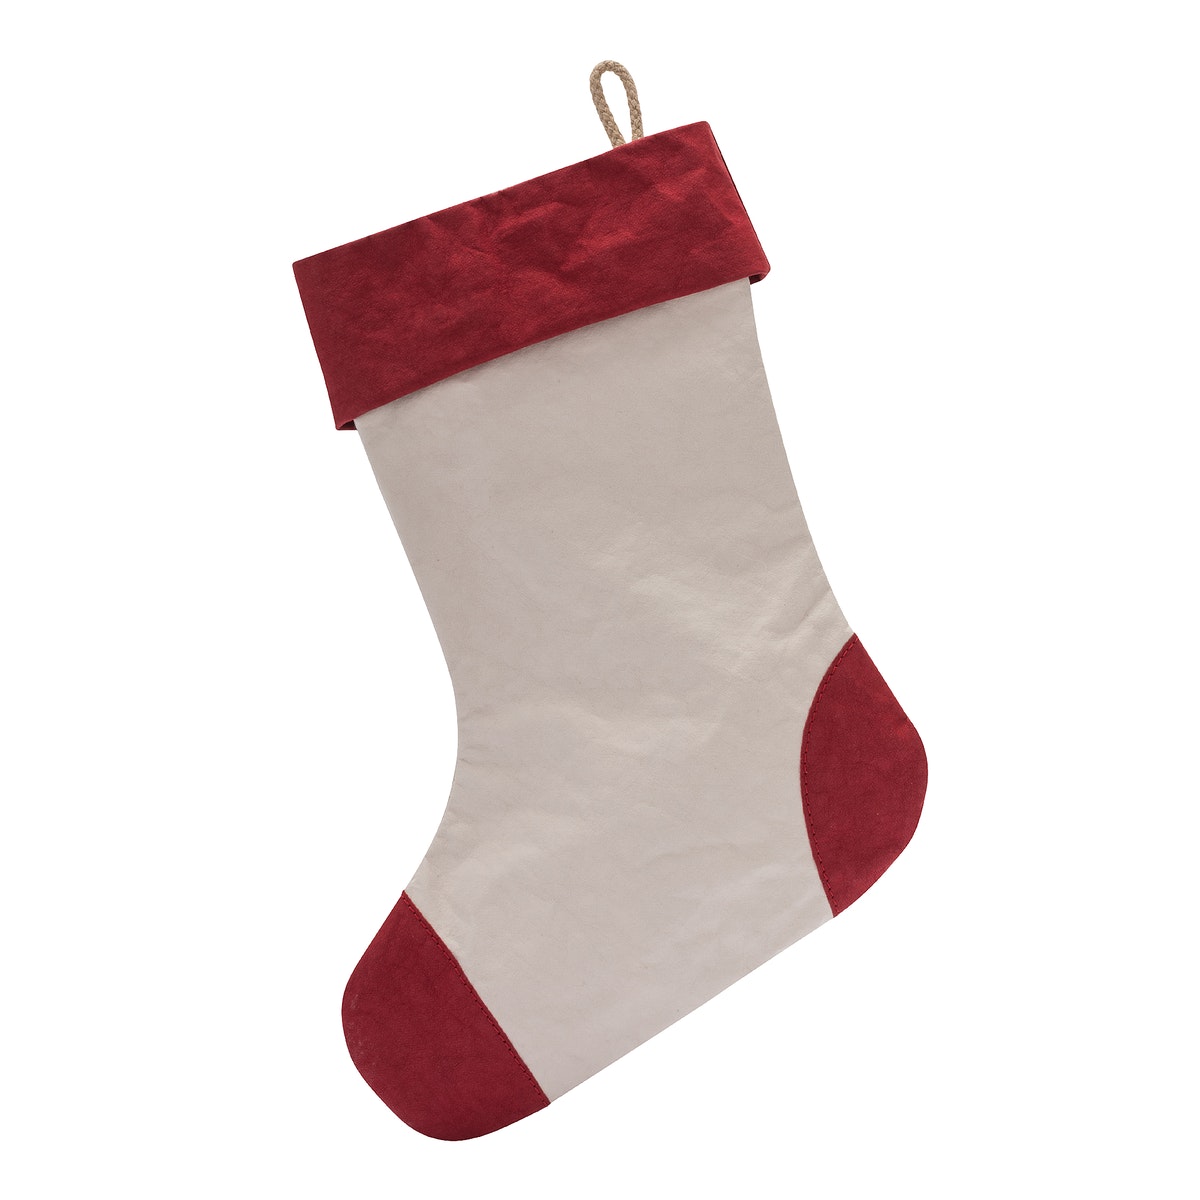 A washable paper Christmas stocking is shown. The body of the stocking is pale cream in colour. There is a fabric hanging loop on the back of the stocking at the top. The cuff, heel and toe of the stocking are red.